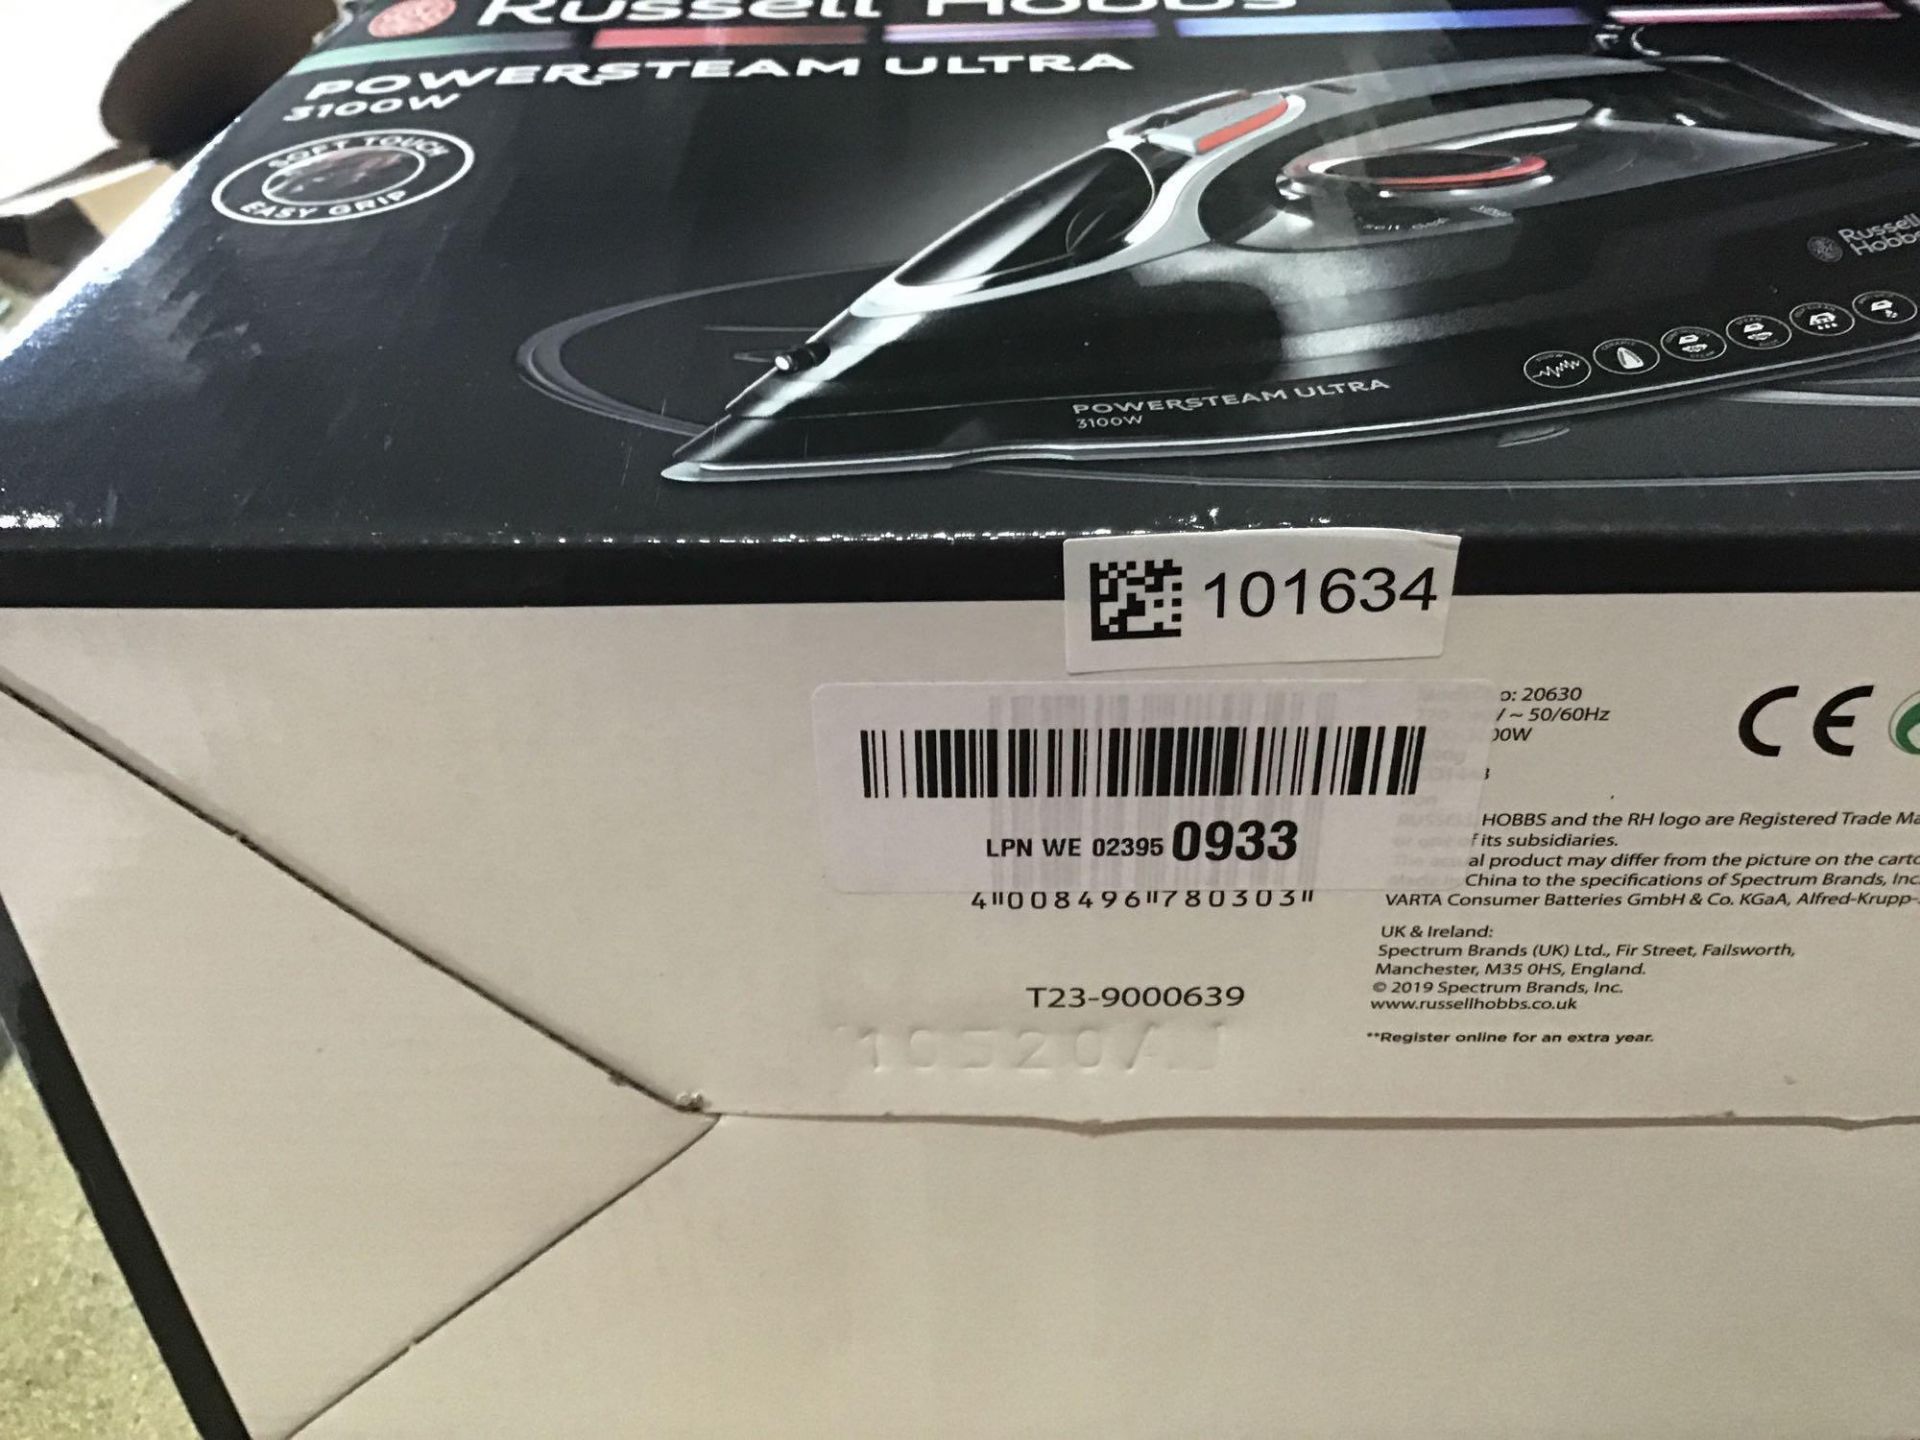 Russell Hobbs Powersteam Ultra 3100 W Vertical Steam Iron 20630 - Black and Grey - £34.99 RRP - Image 4 of 4